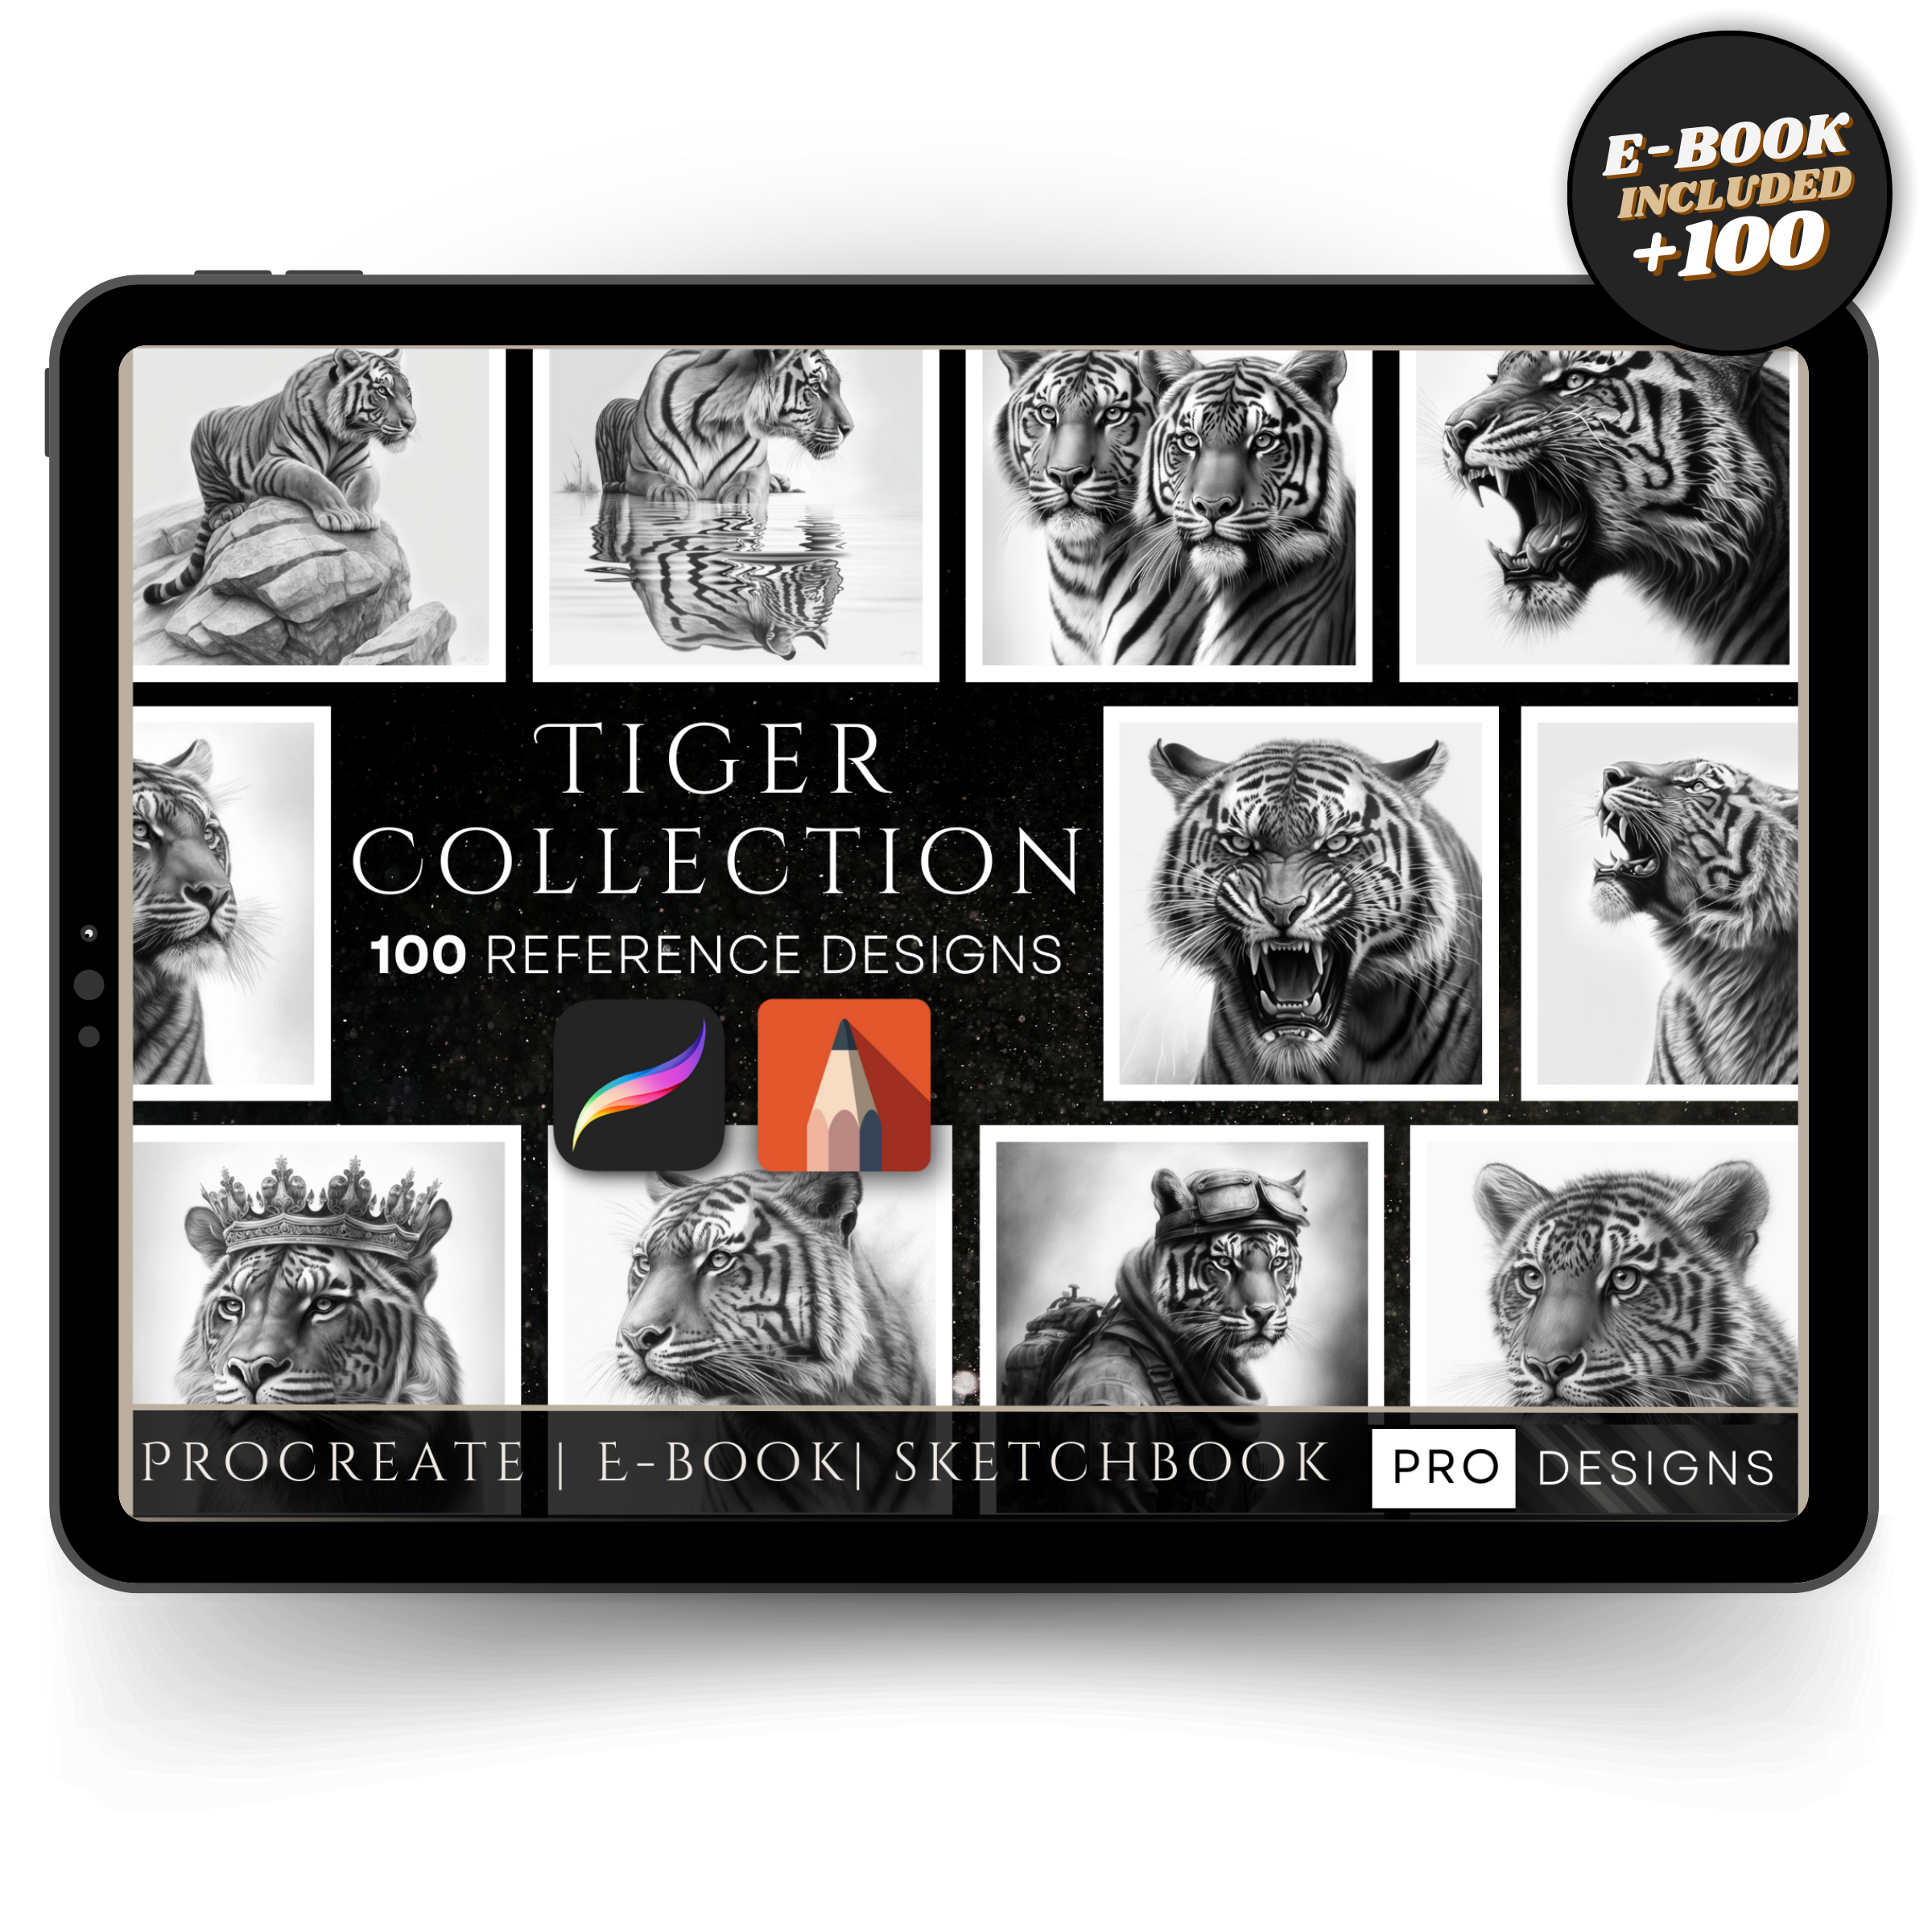 "Stripes of the Wild" - The Tiger Collection